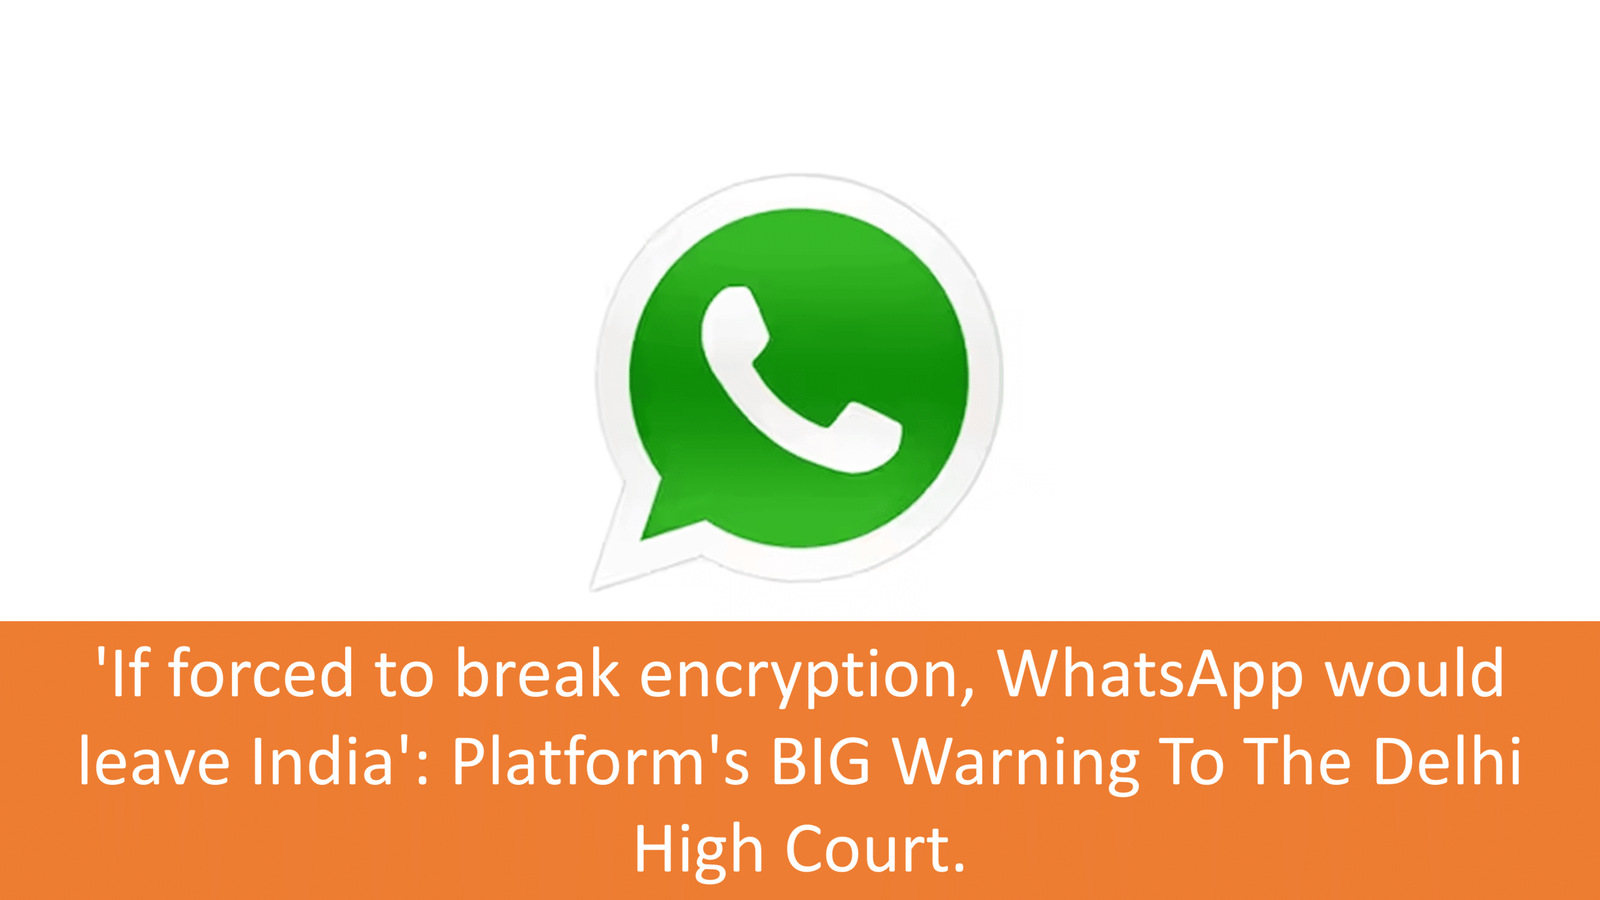 'If forced to break encryption, WhatsApp would leave India': Platform's BIG Warning To The Delhi High Court.